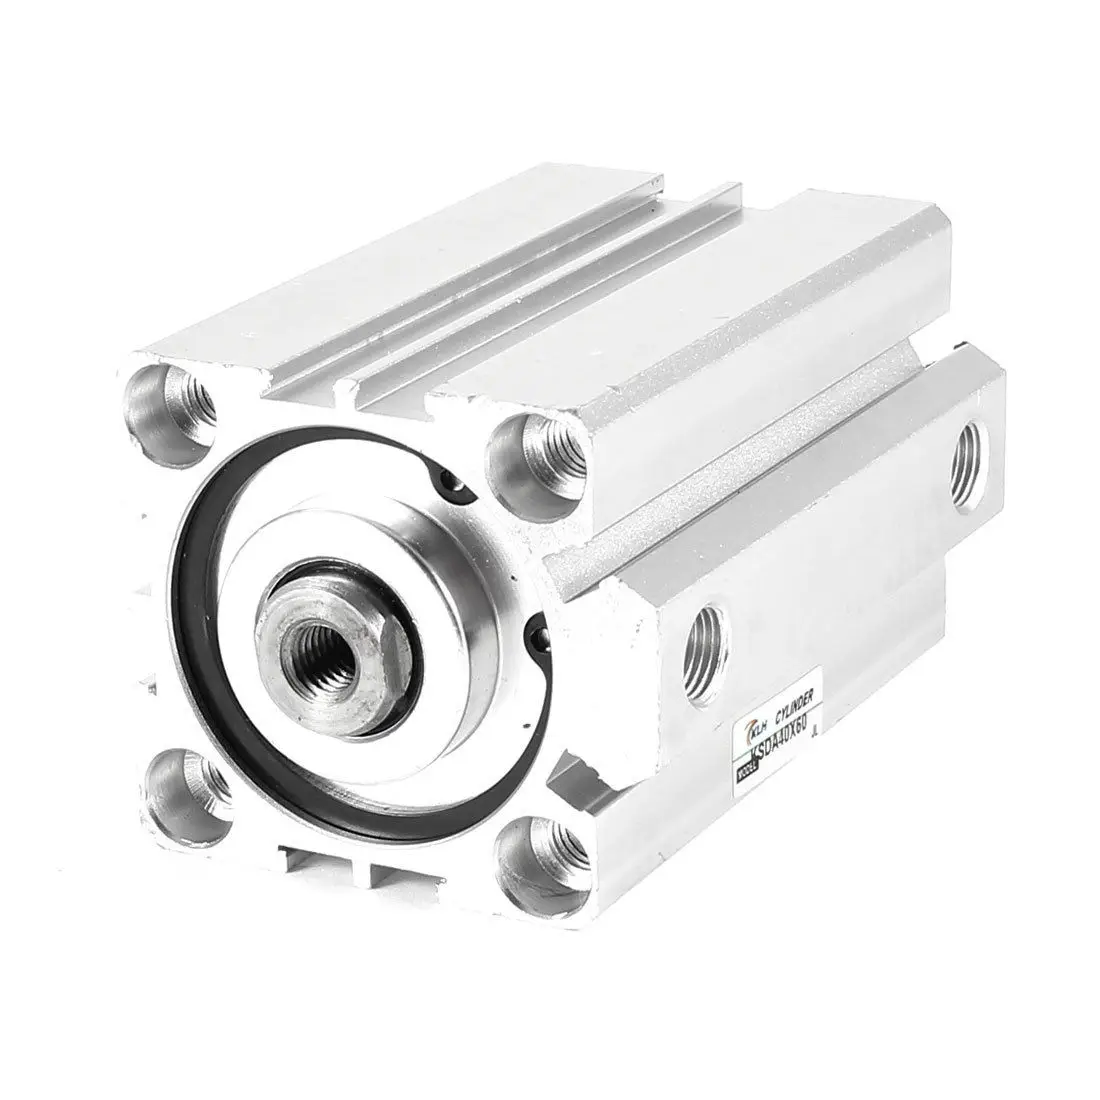 SDA63-50 63mm Bore 50mm Stroke Stainless steel Pneumatic Air Cylinder 